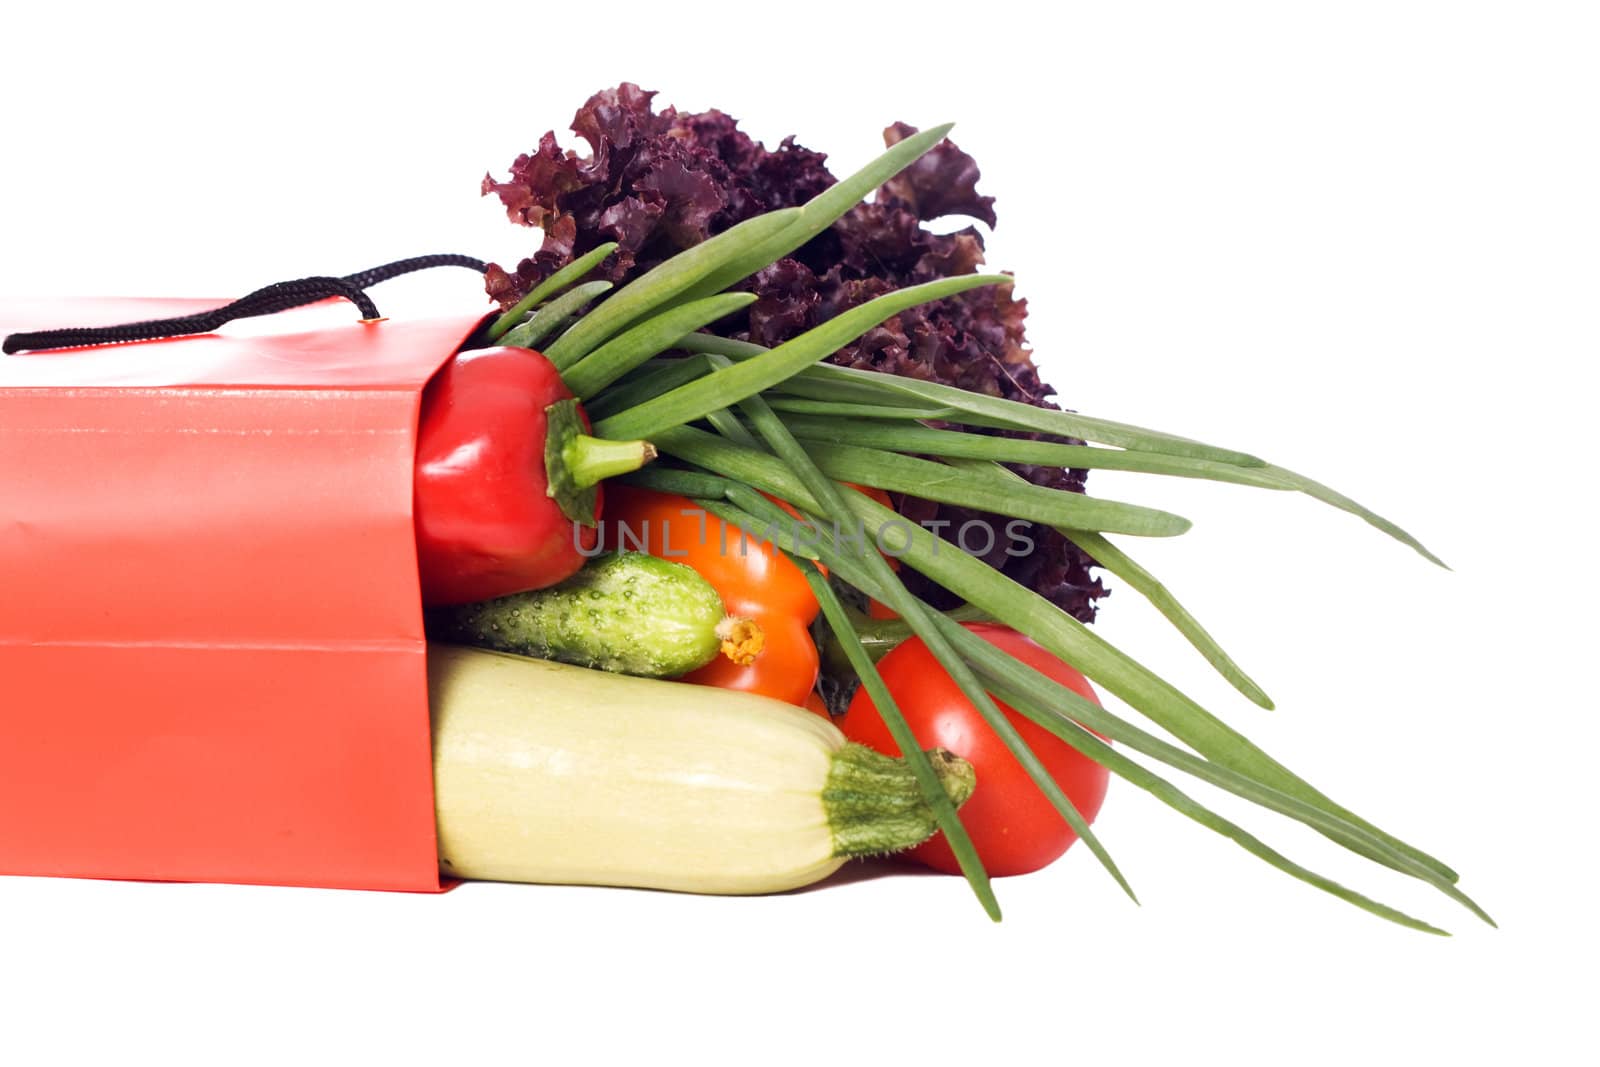 grocery bag full of vegetables isolated on white background